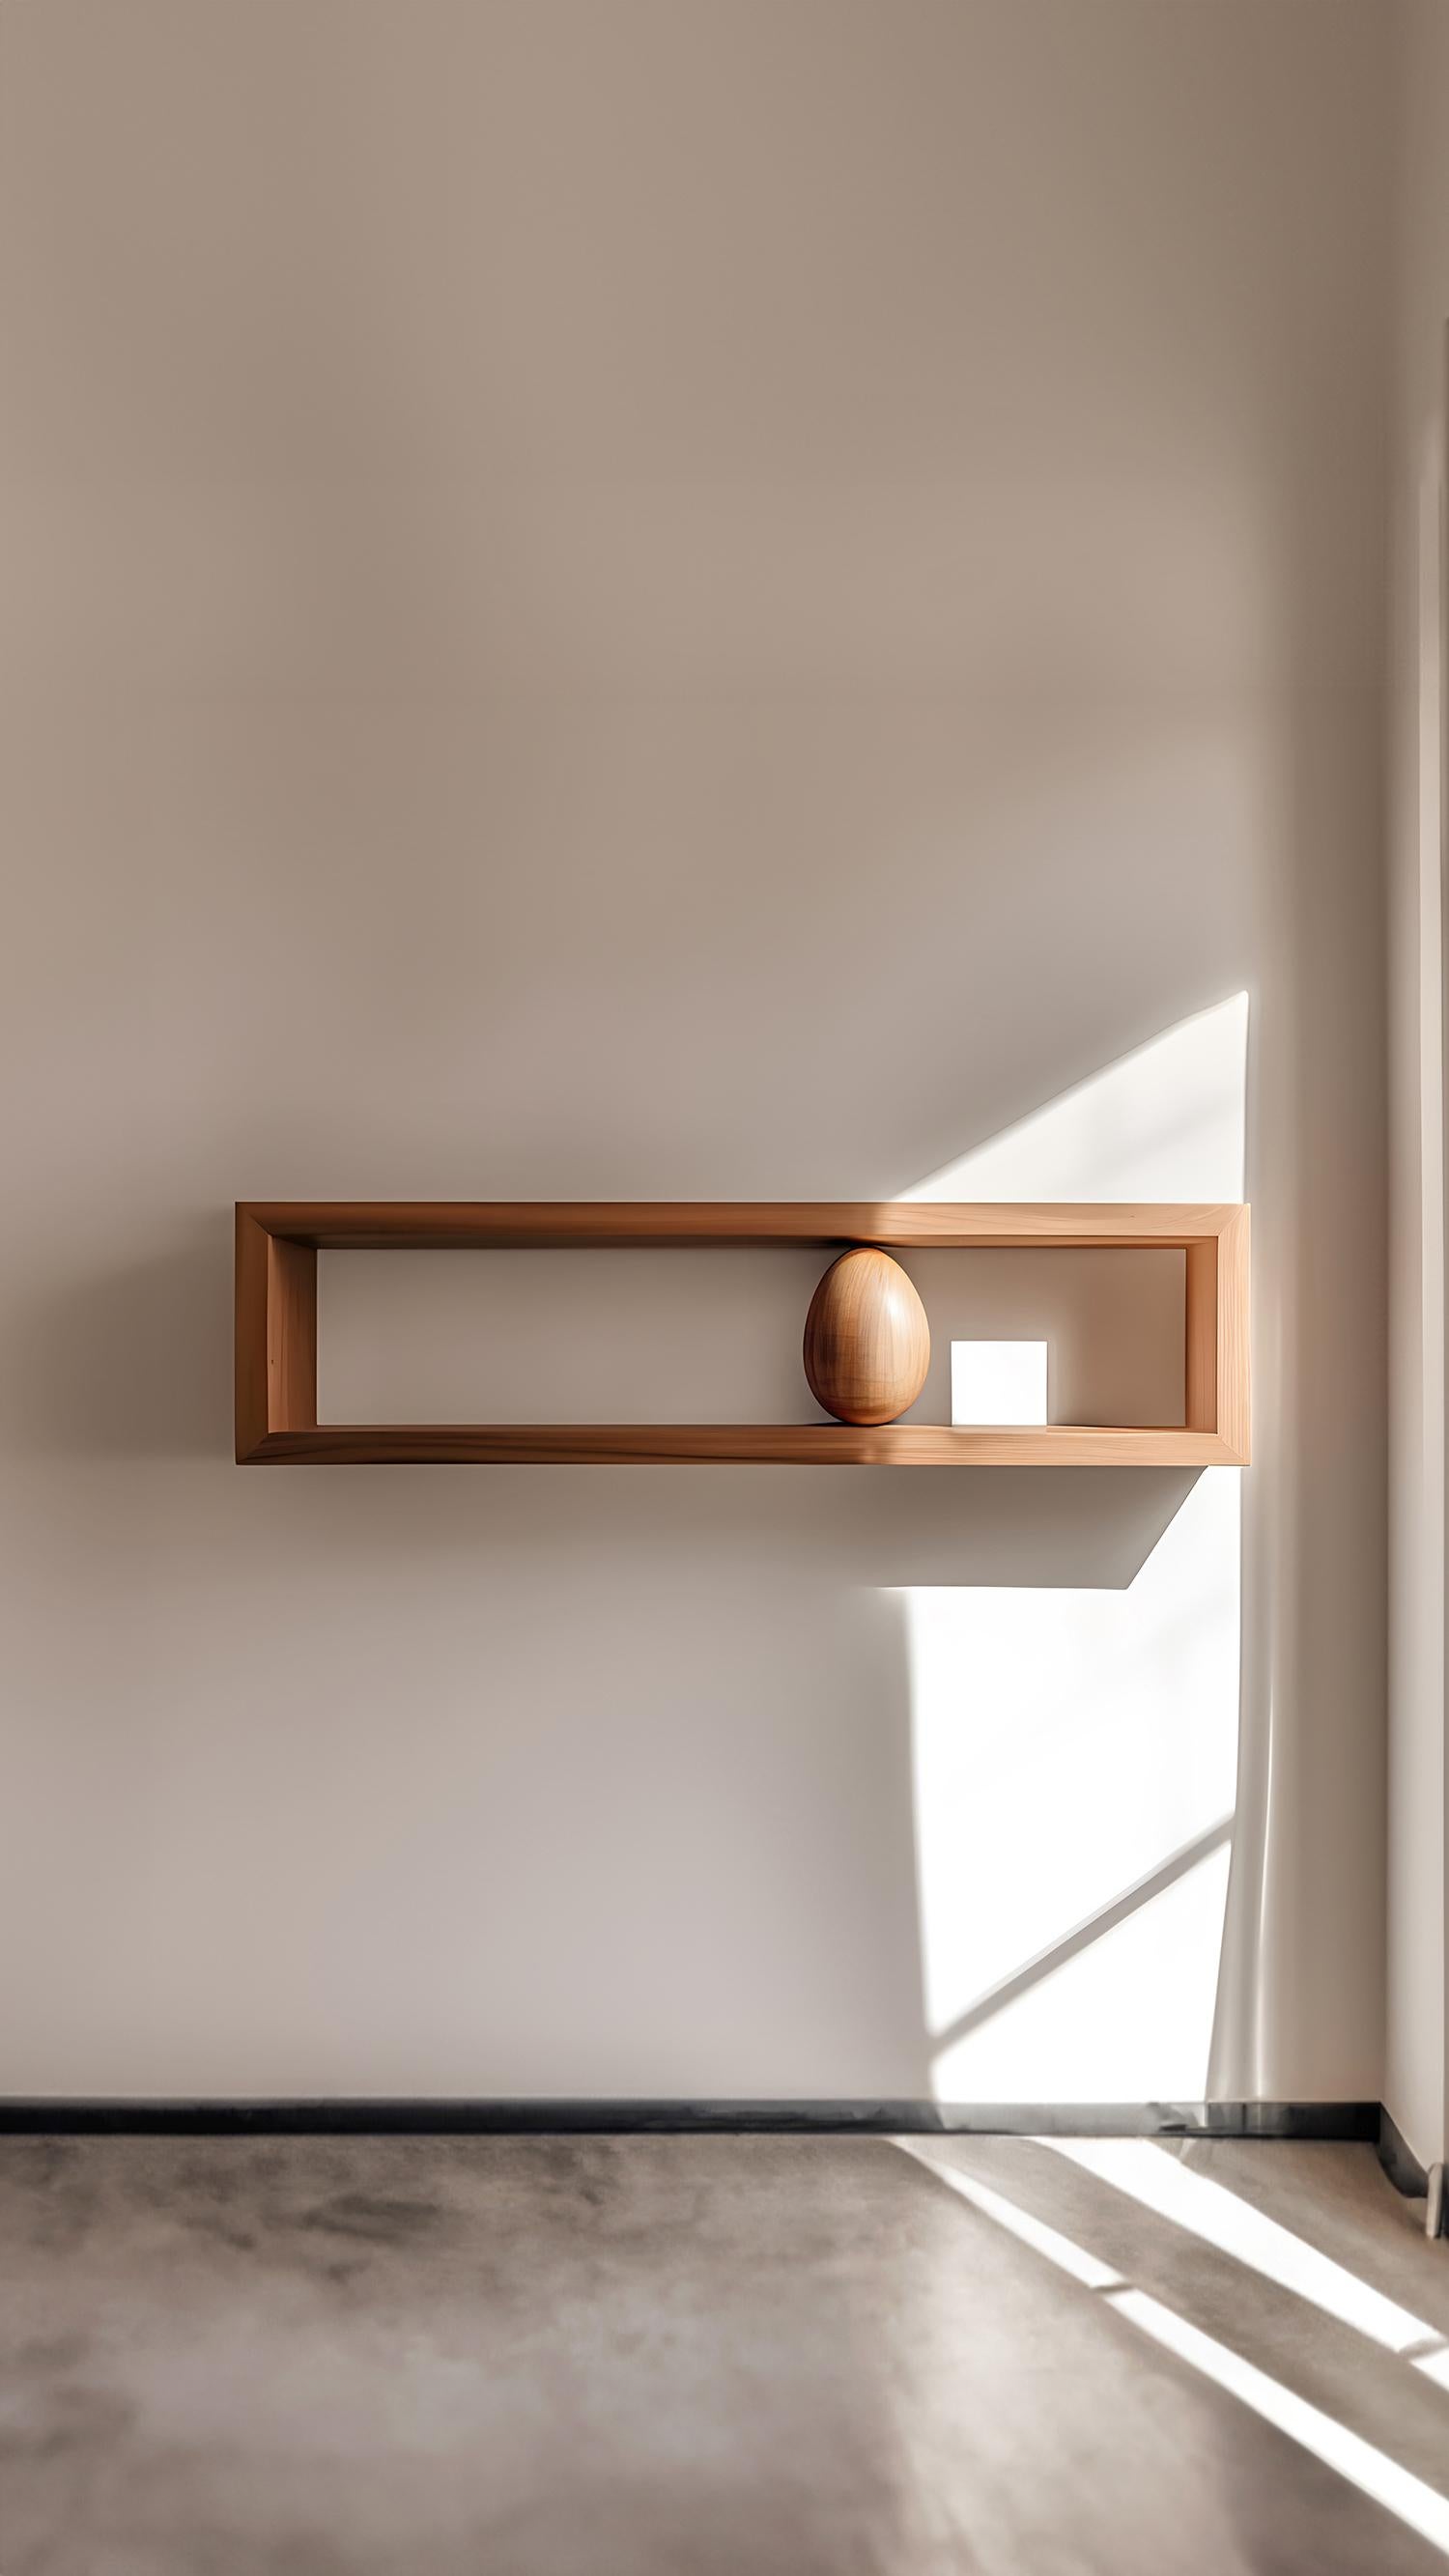 Veneer Rectangular Floating Shelf and One Large Sculptural Wooden Pebble Sereno by Nono For Sale